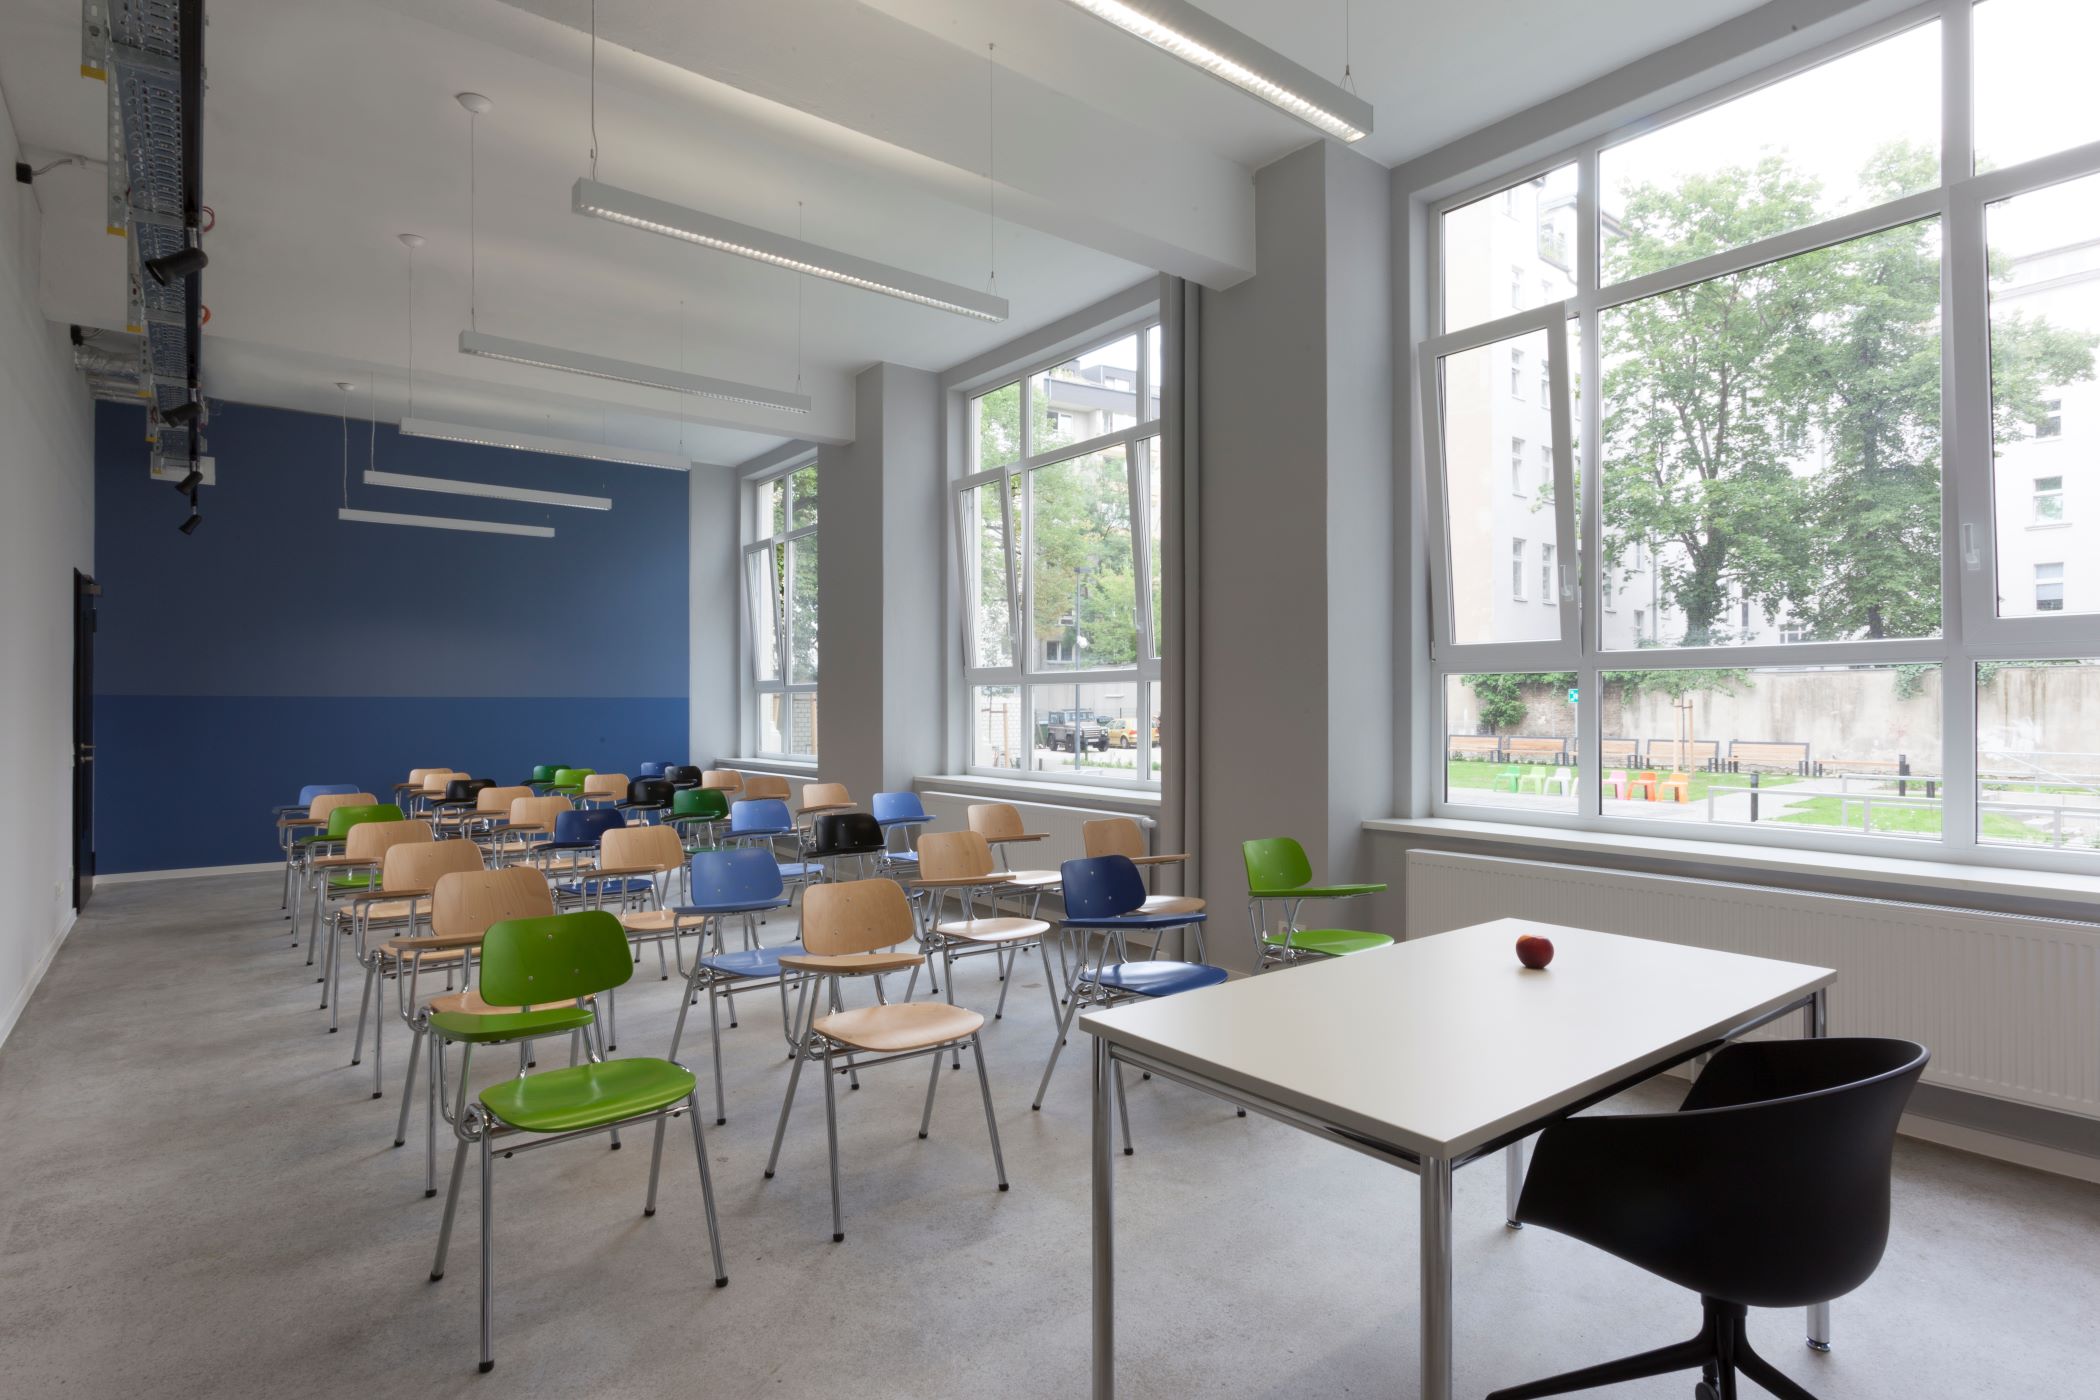 classroom set up with multi-colored chairs and large windows